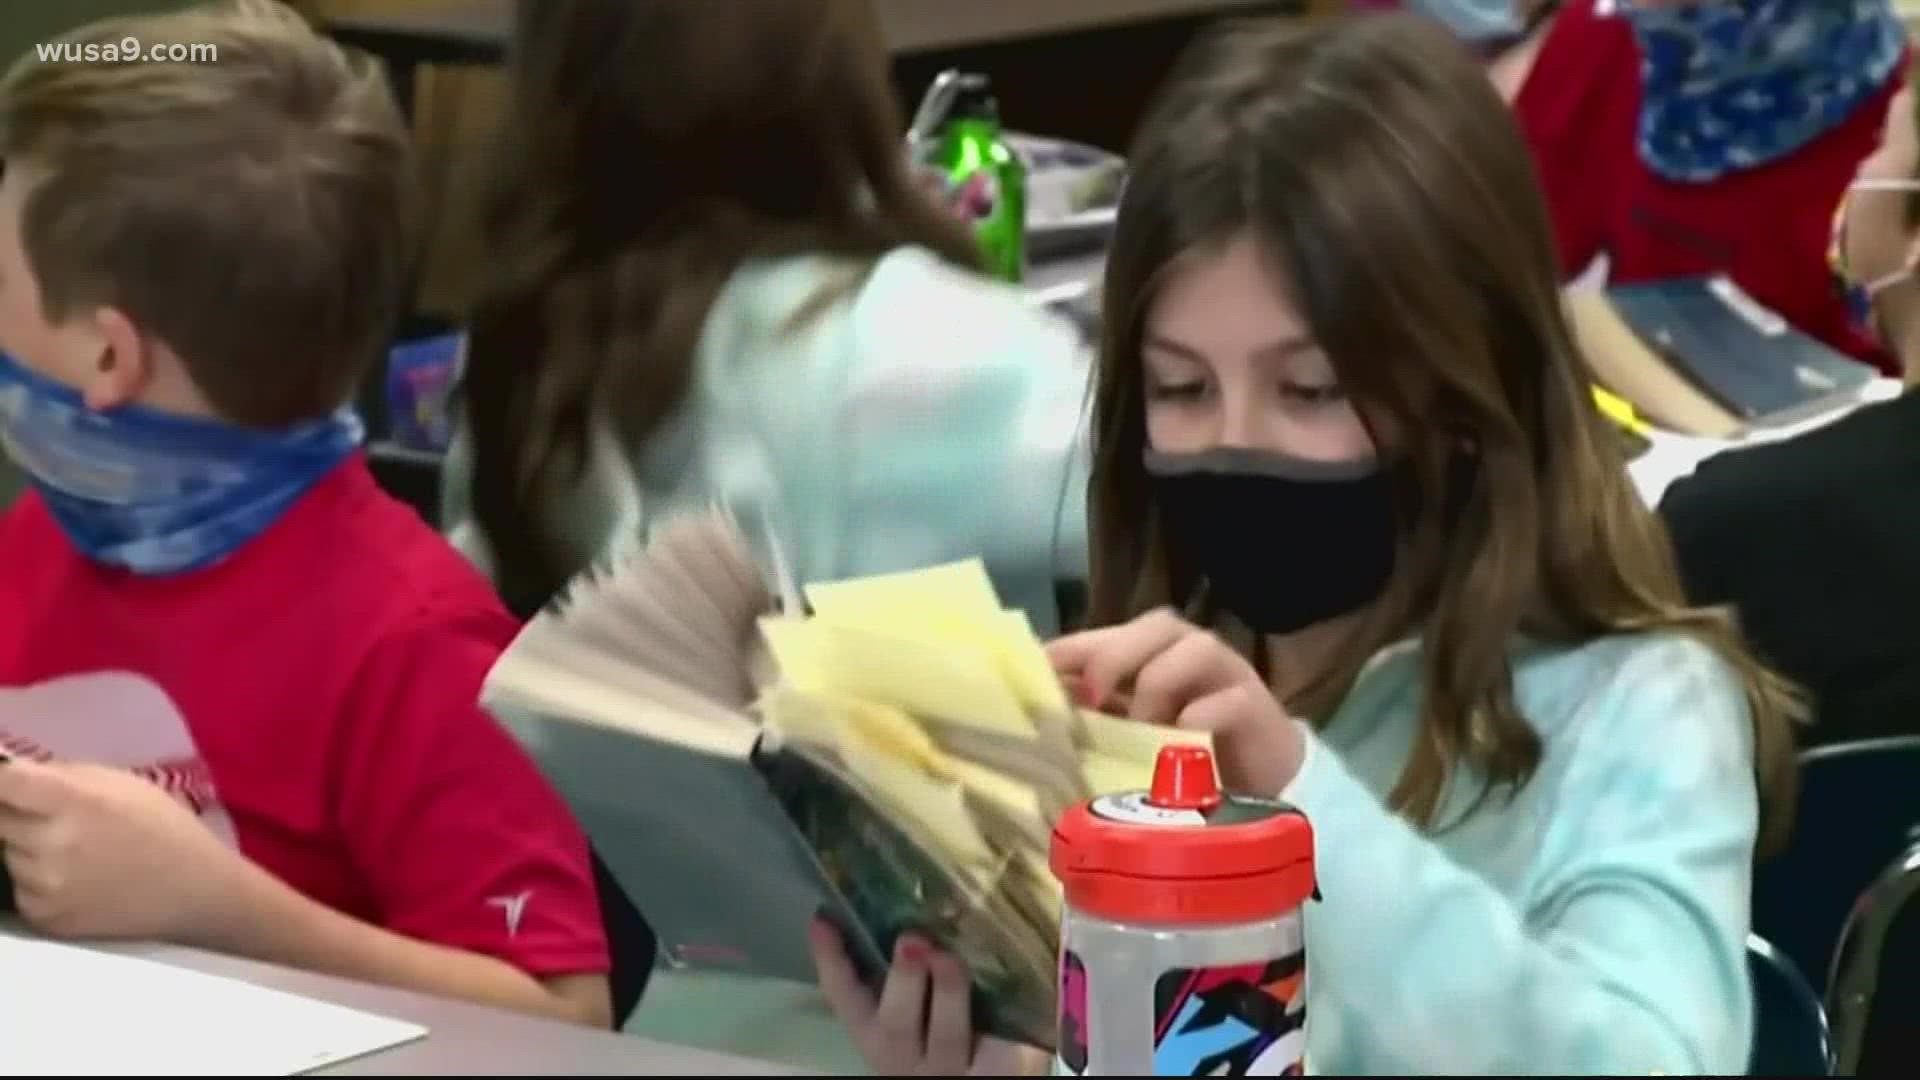 The school district is urging parents to have a talk with their child about their family's preference on mask-wearing on school property ahead of Tuesday.